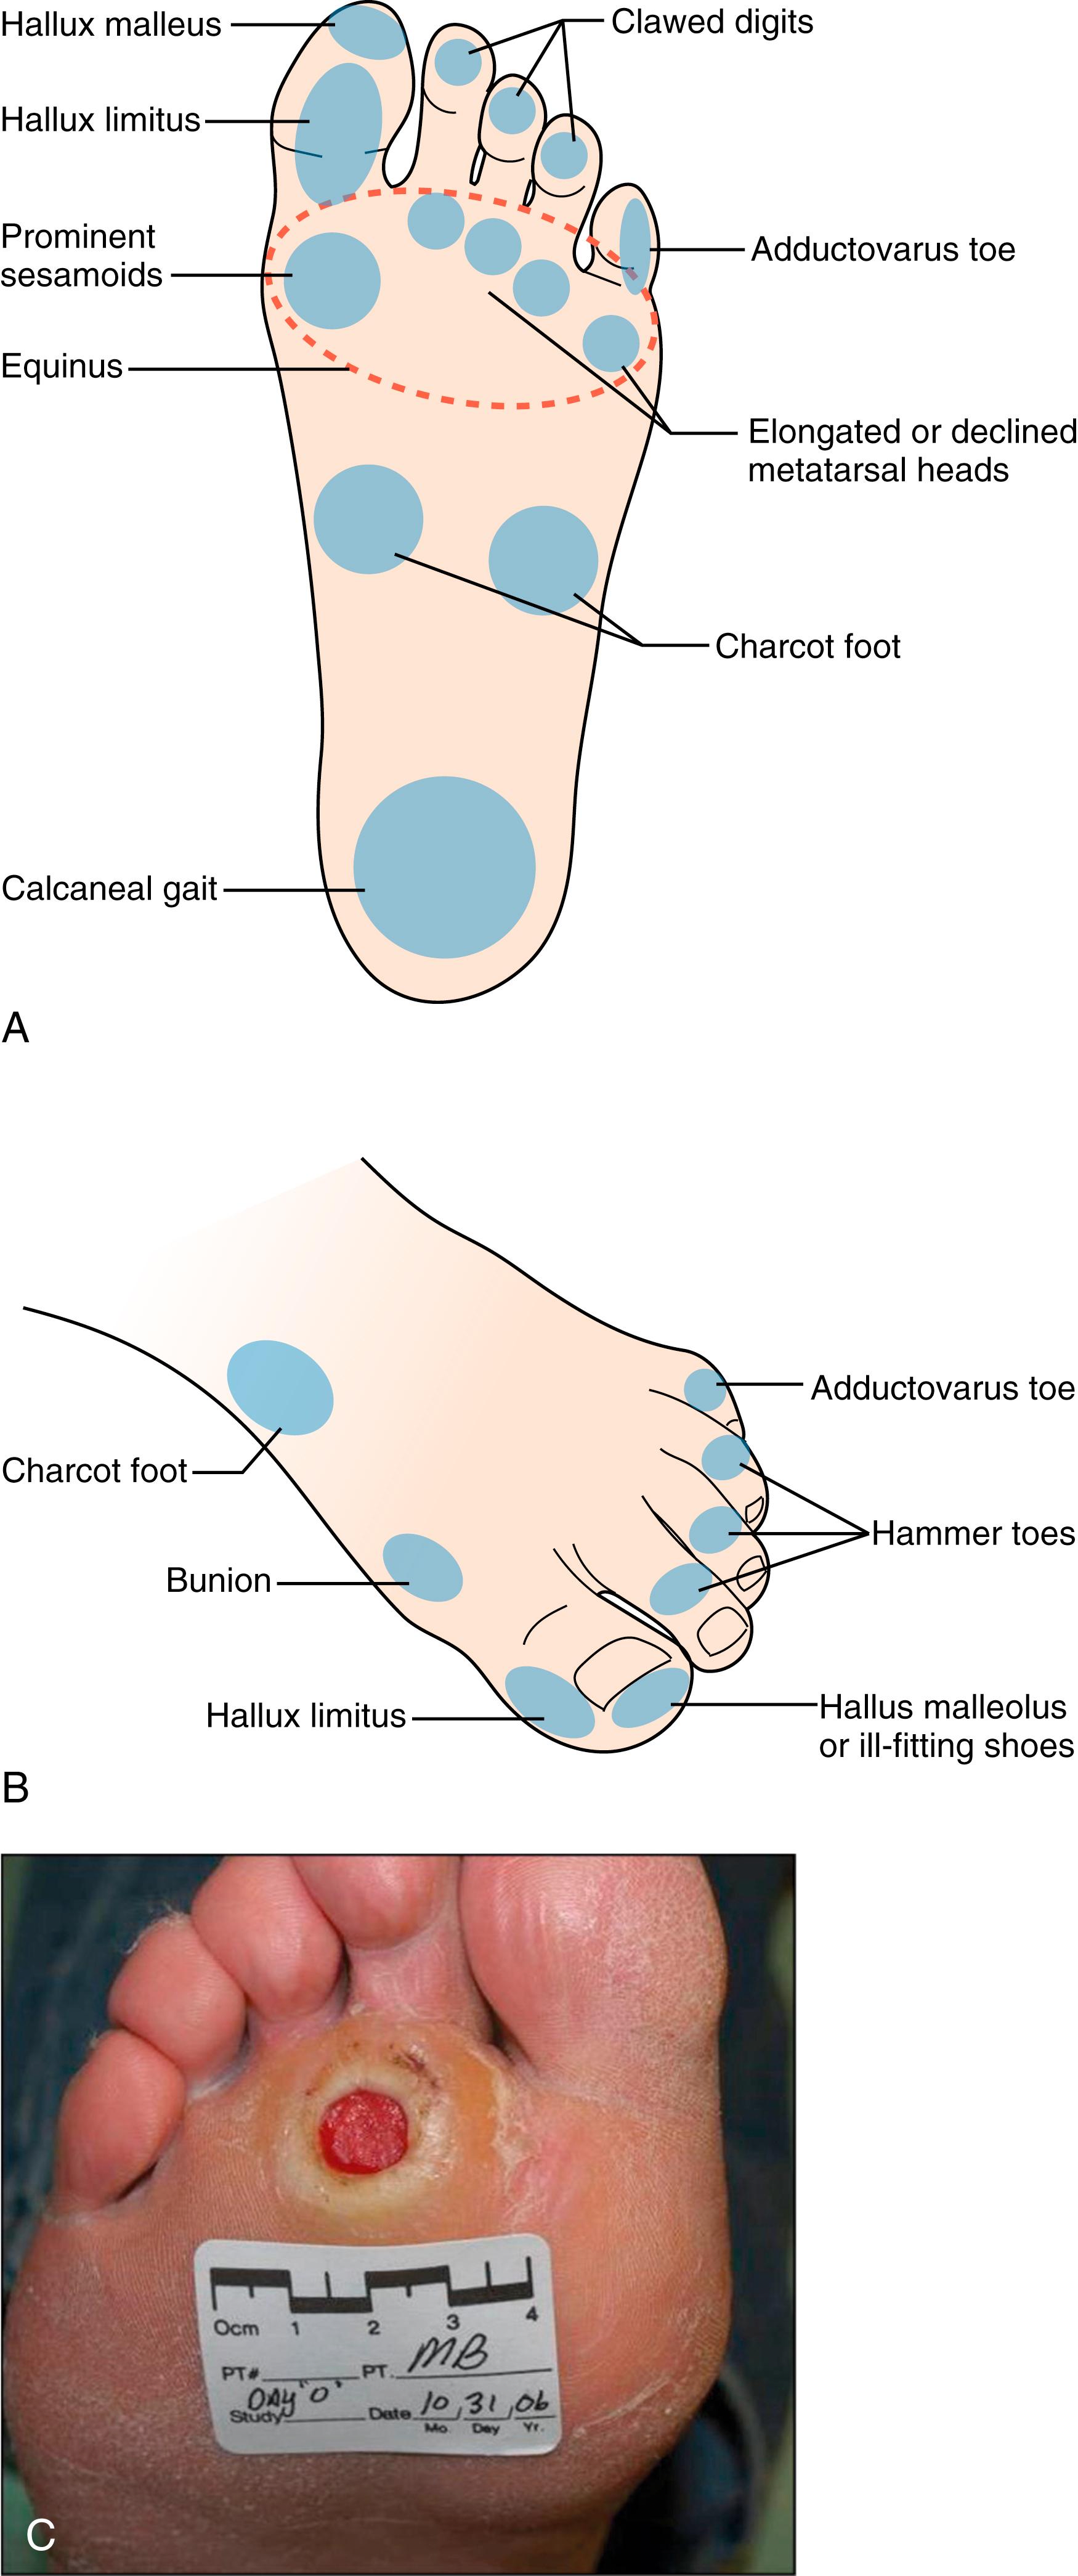 Figure 116.2, Locations of skin lesions on the diabetic foot with corresponding biomechanical etiologies related to the plantar ( A ) and dorsum ( B ) surfaces with an example of a diabetic dorsal foot wound ( C ). (C, Courtesy Vickie Driver, MD)